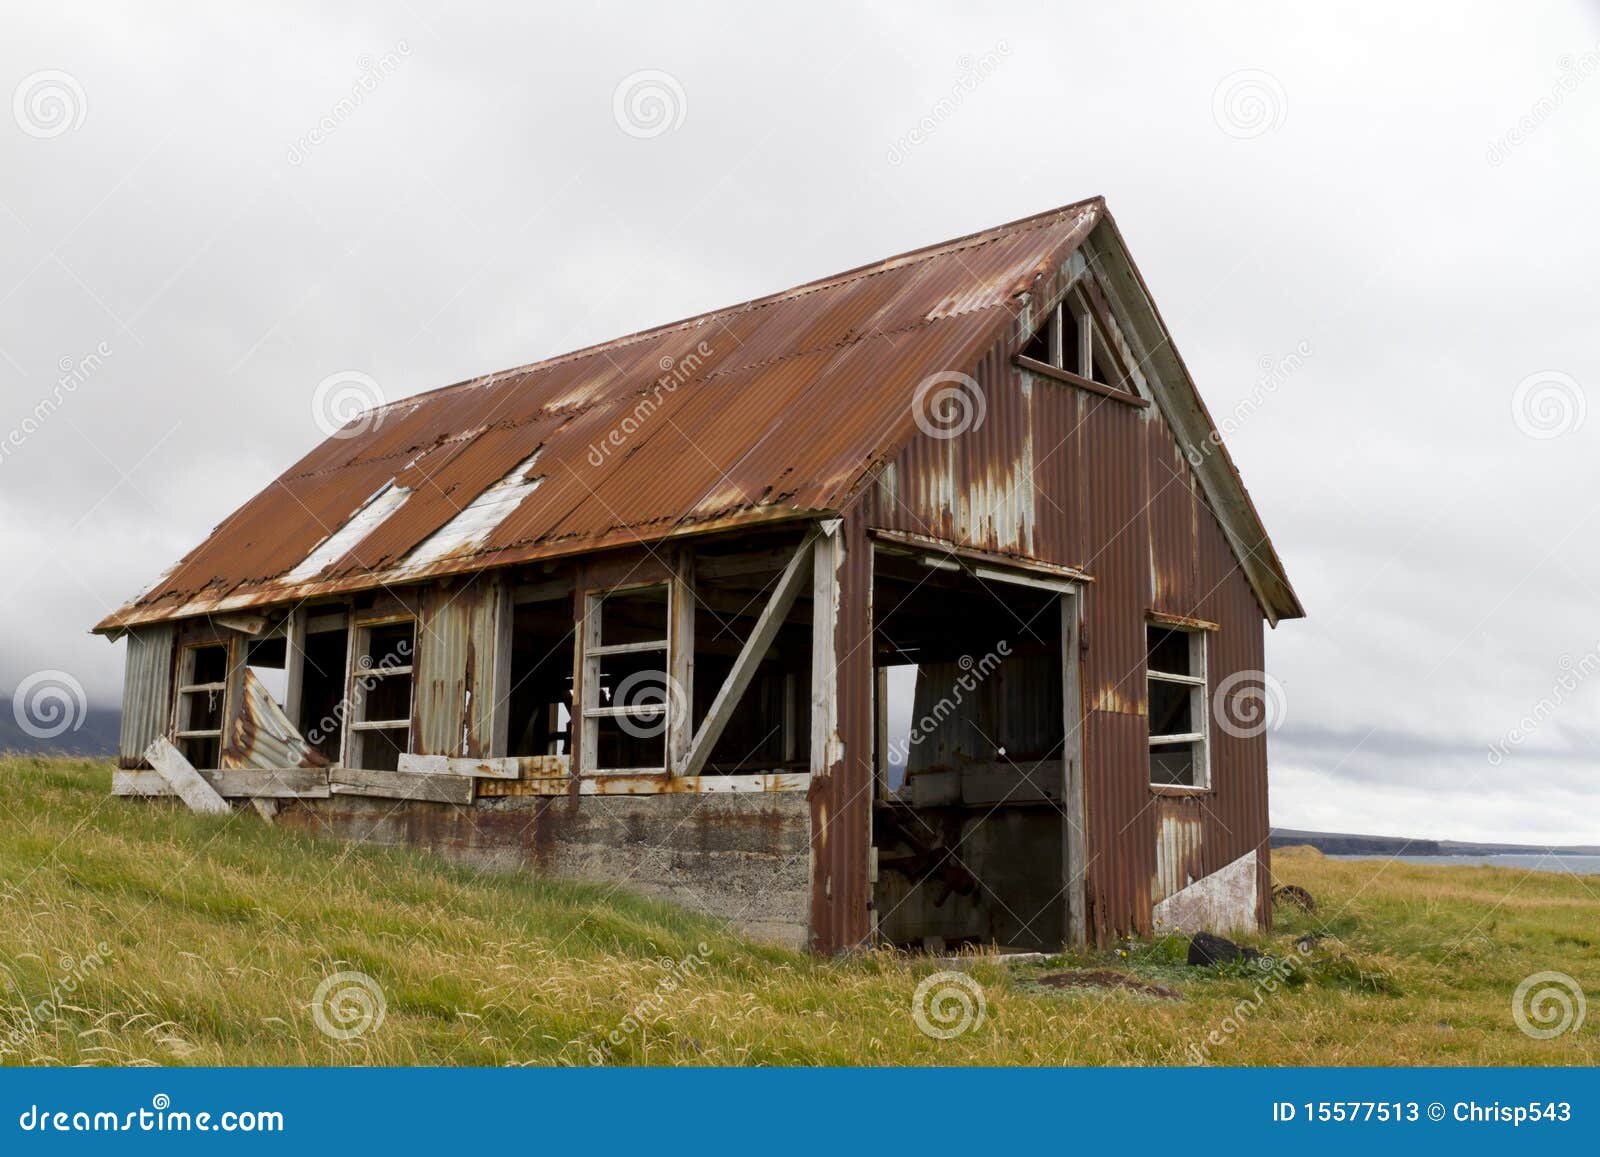 Run down old shed clad in rusty corrugated iron, situated on the coast 